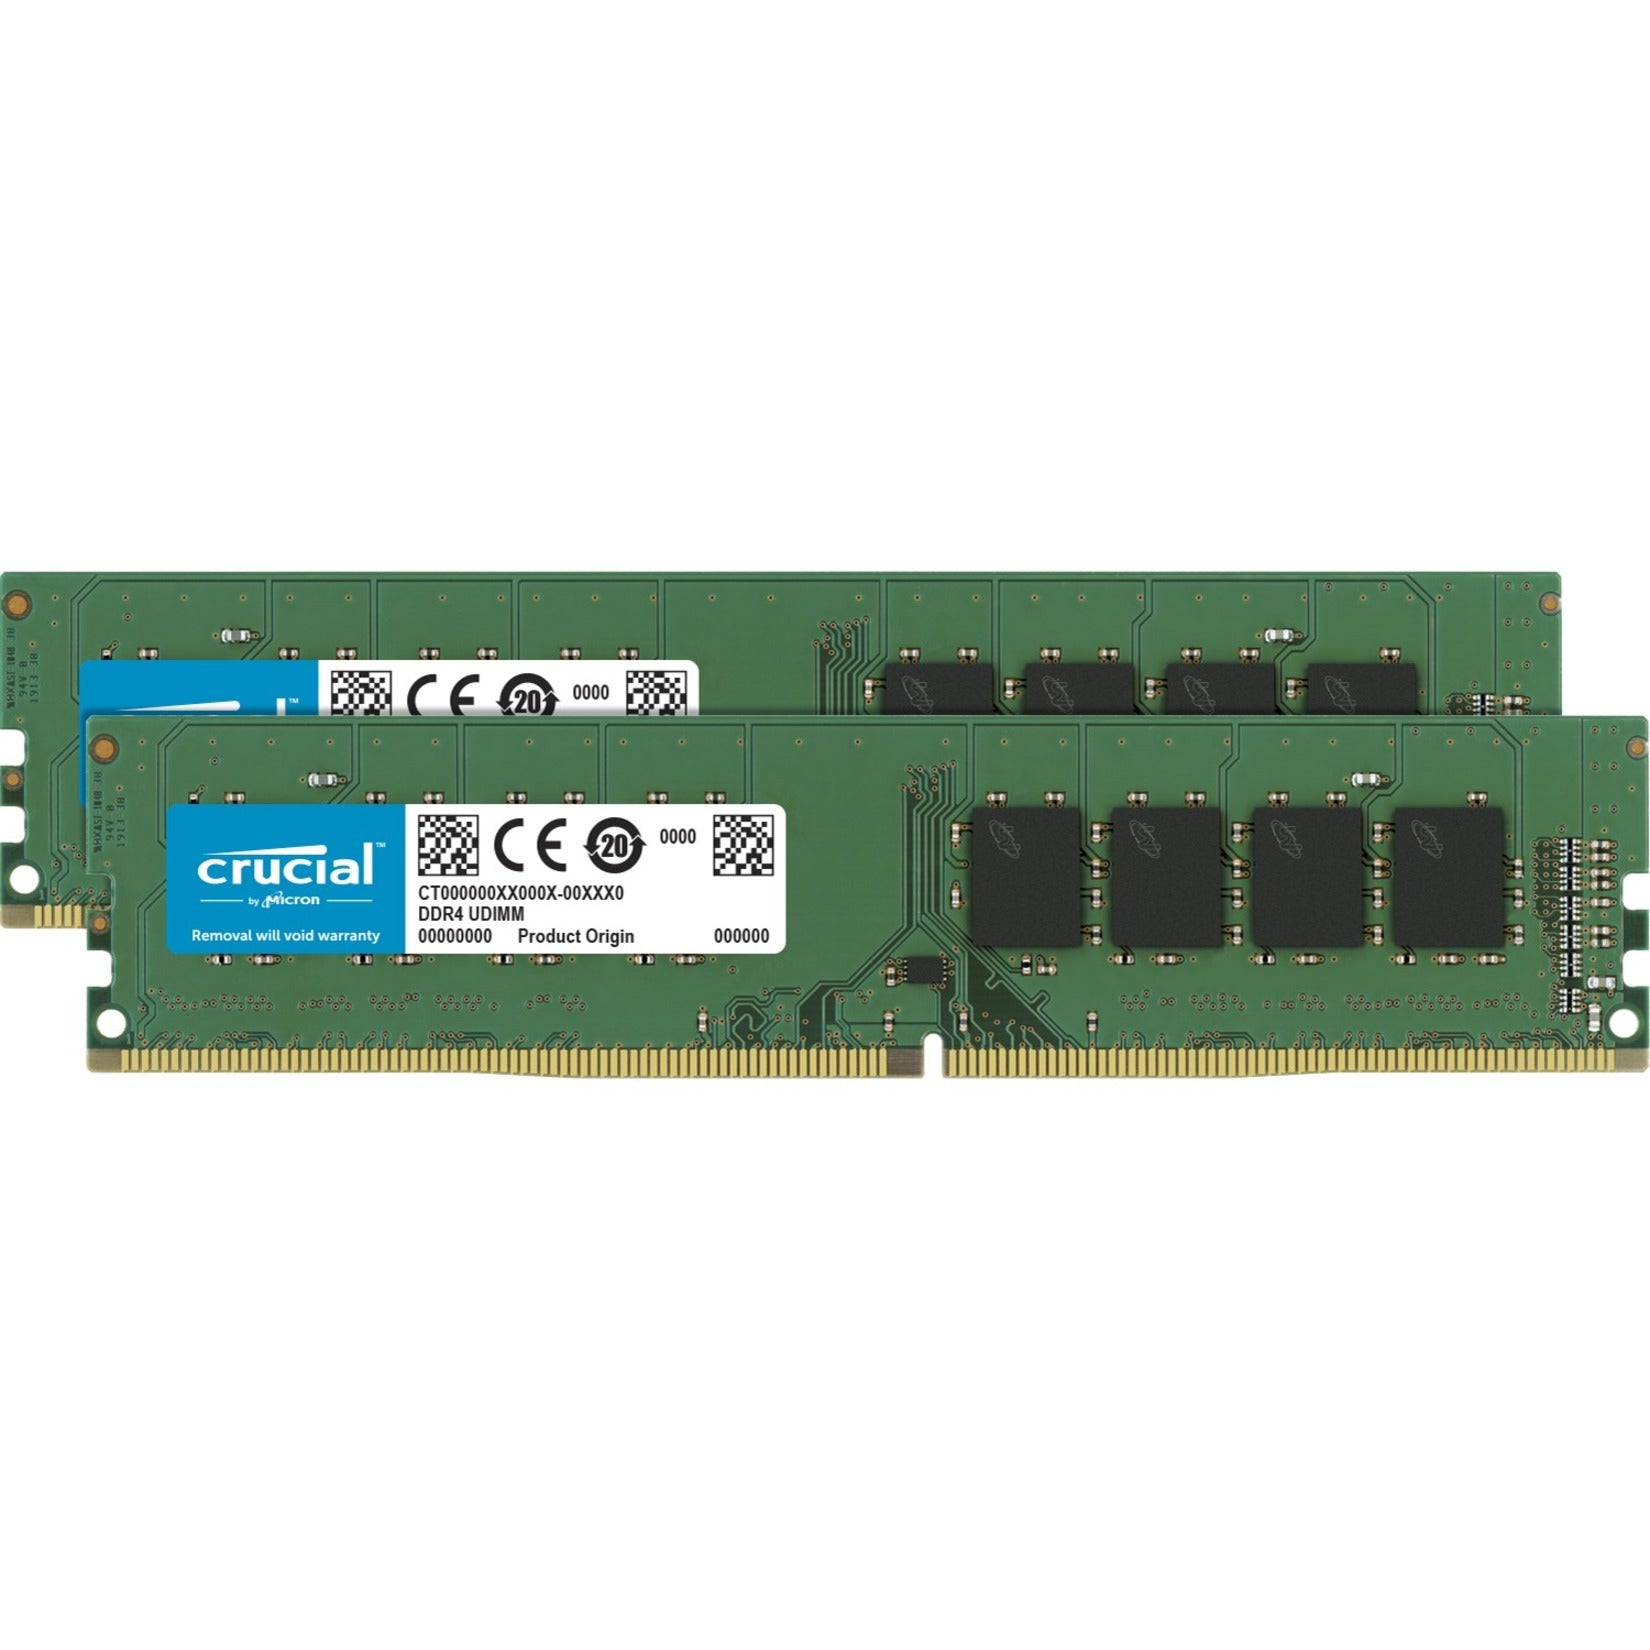 Crucial 8GB DDR4 SDRAM Memory Module - Boost Your System's Performance [Discontinued]